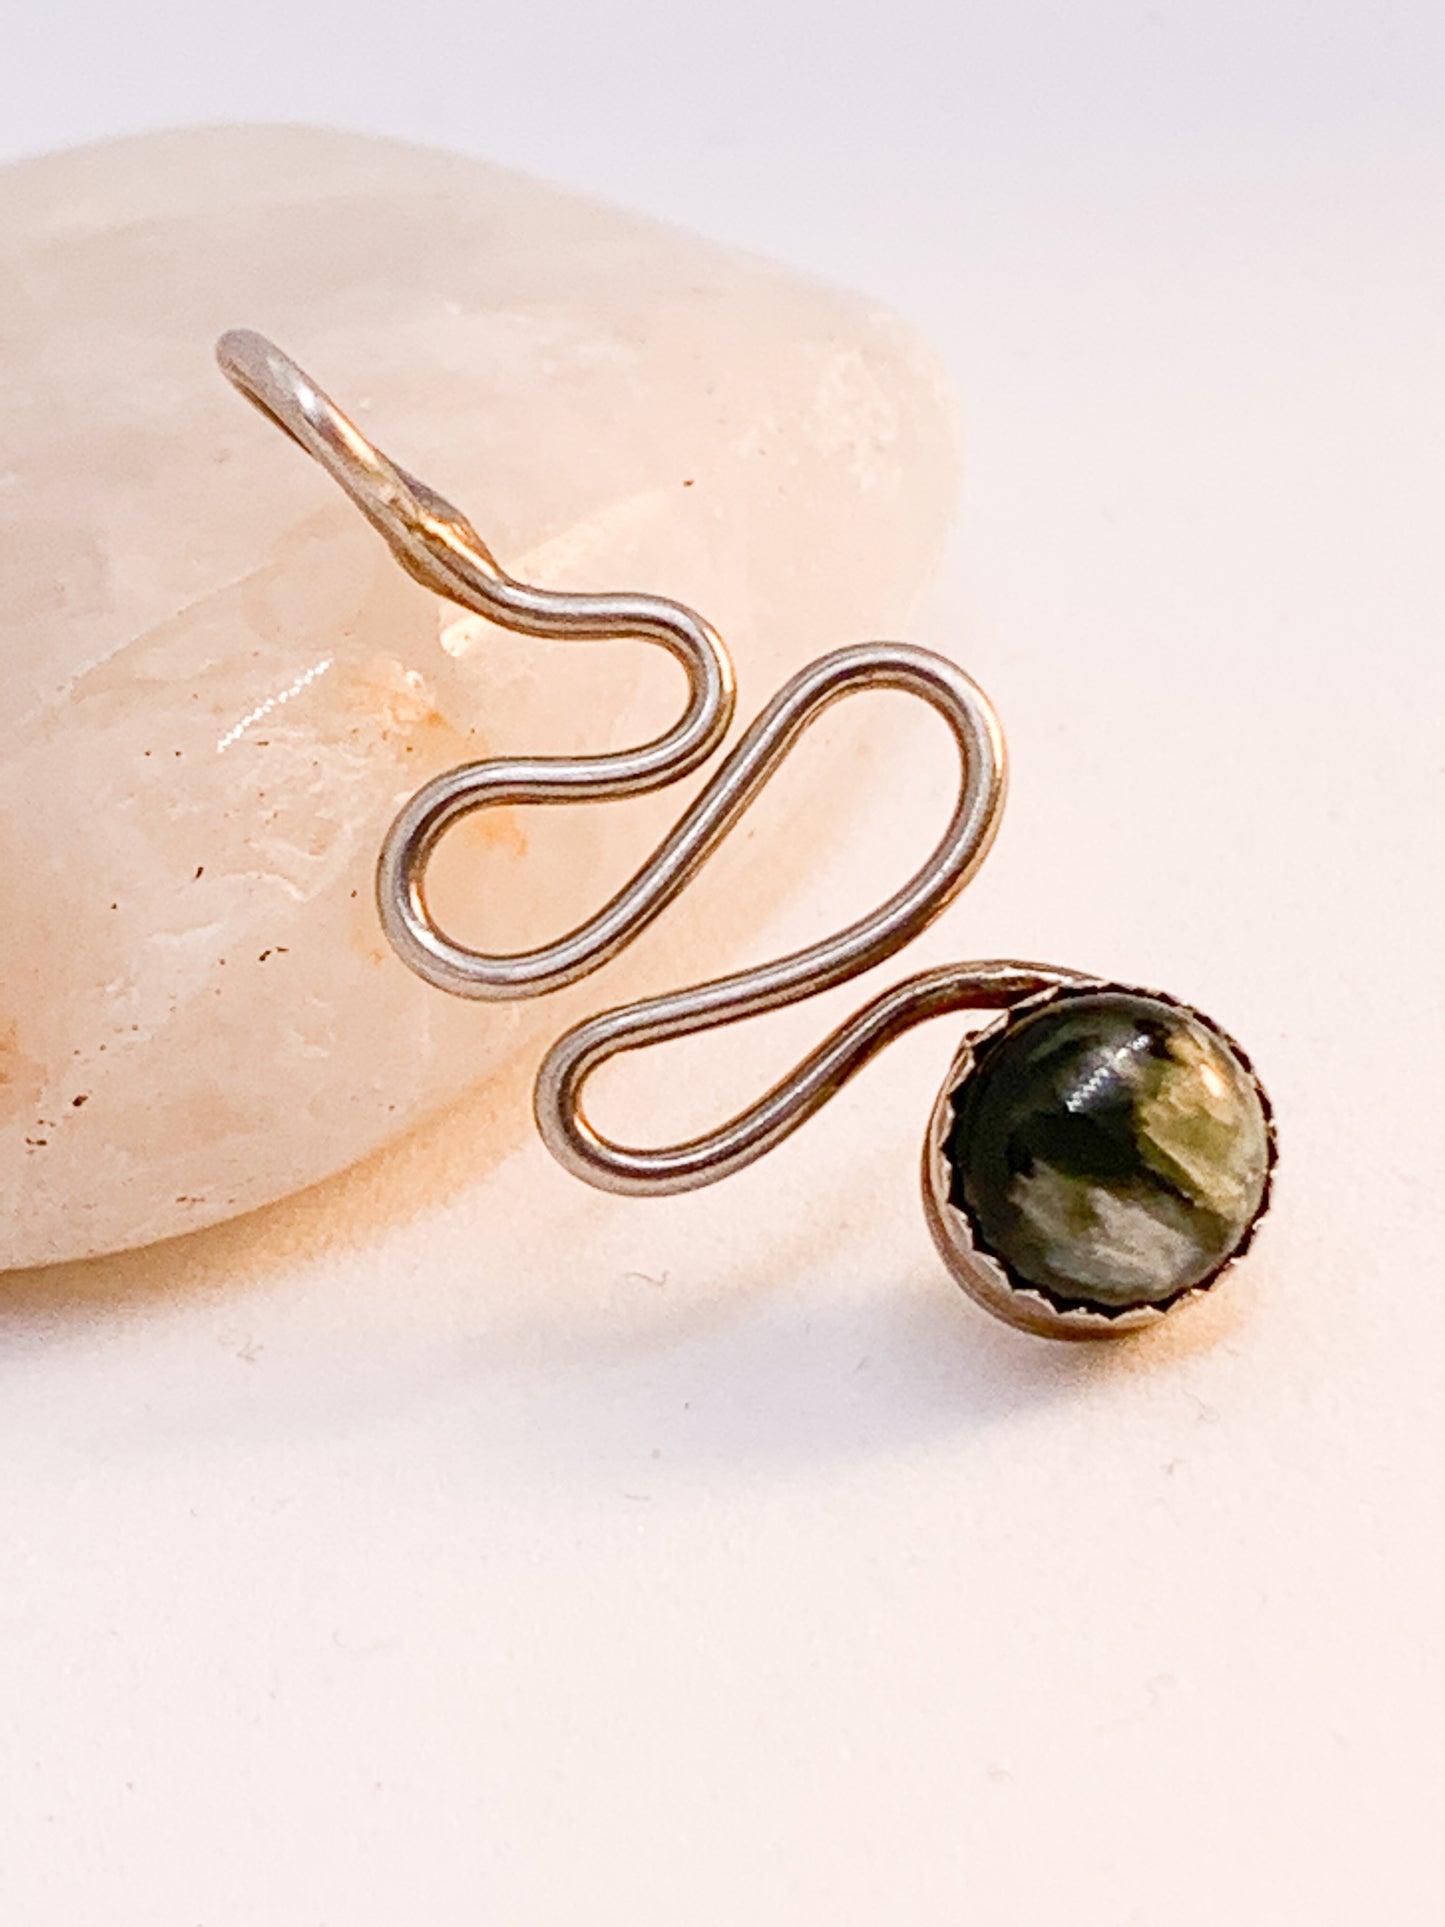 The pendant features a serene Seraphinite cabochon, hand-set in sterling silver, creating a stunning contrast between its silvery feather-like patterns and the deep, lush green hues of the stone.